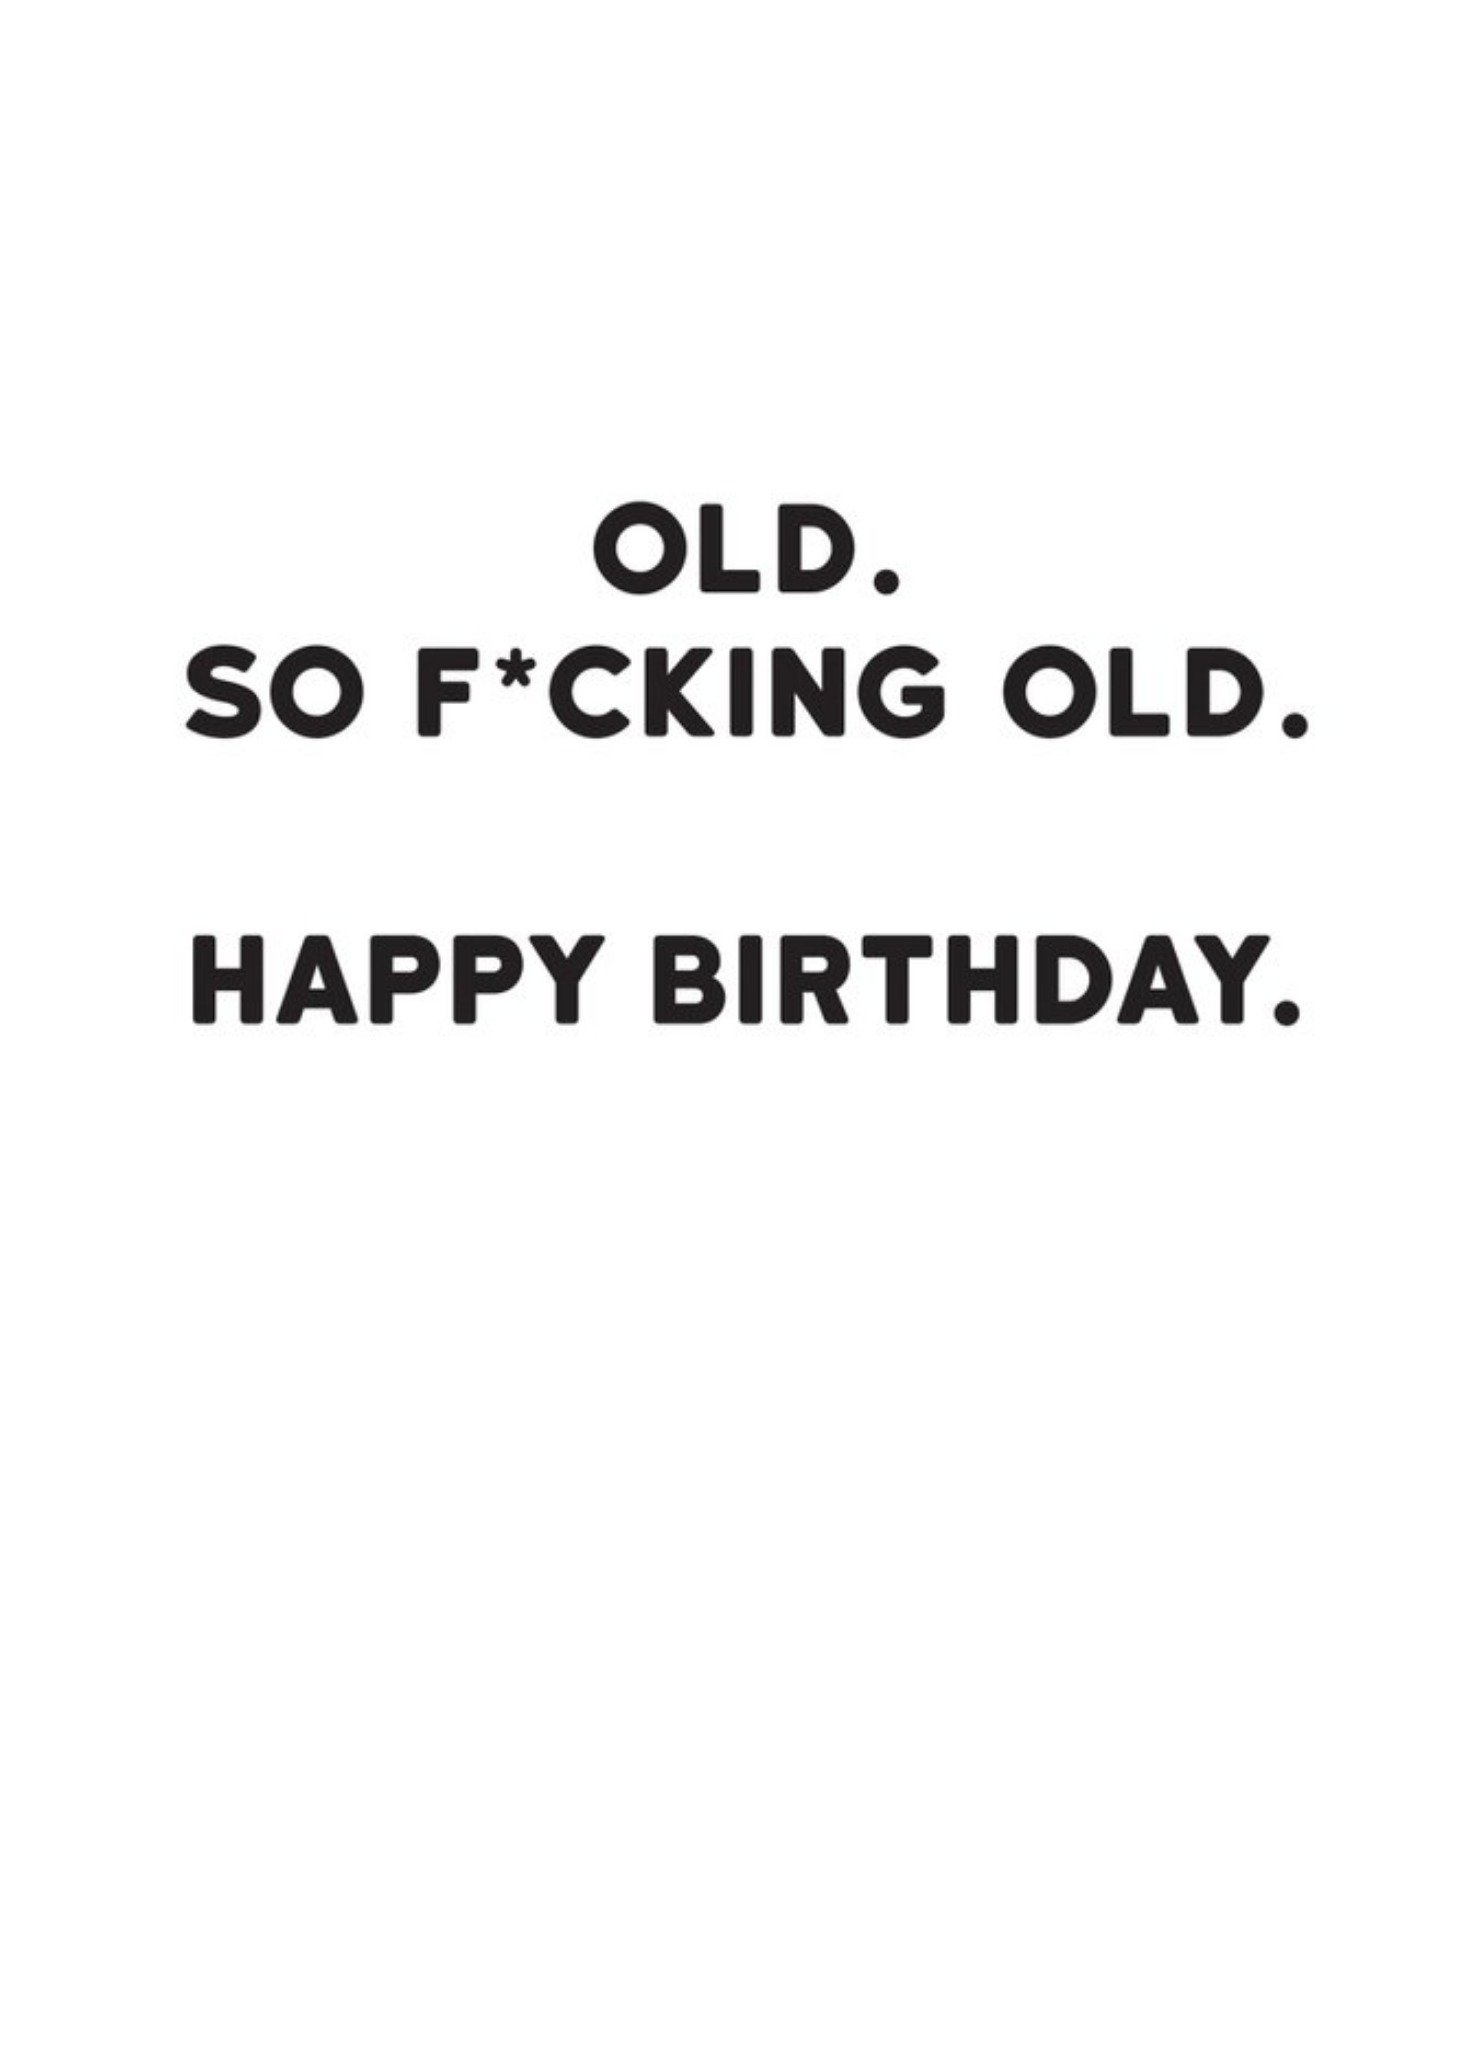 Moonpig Modern Funny Typographical Old So Old Birthday Card Ecard